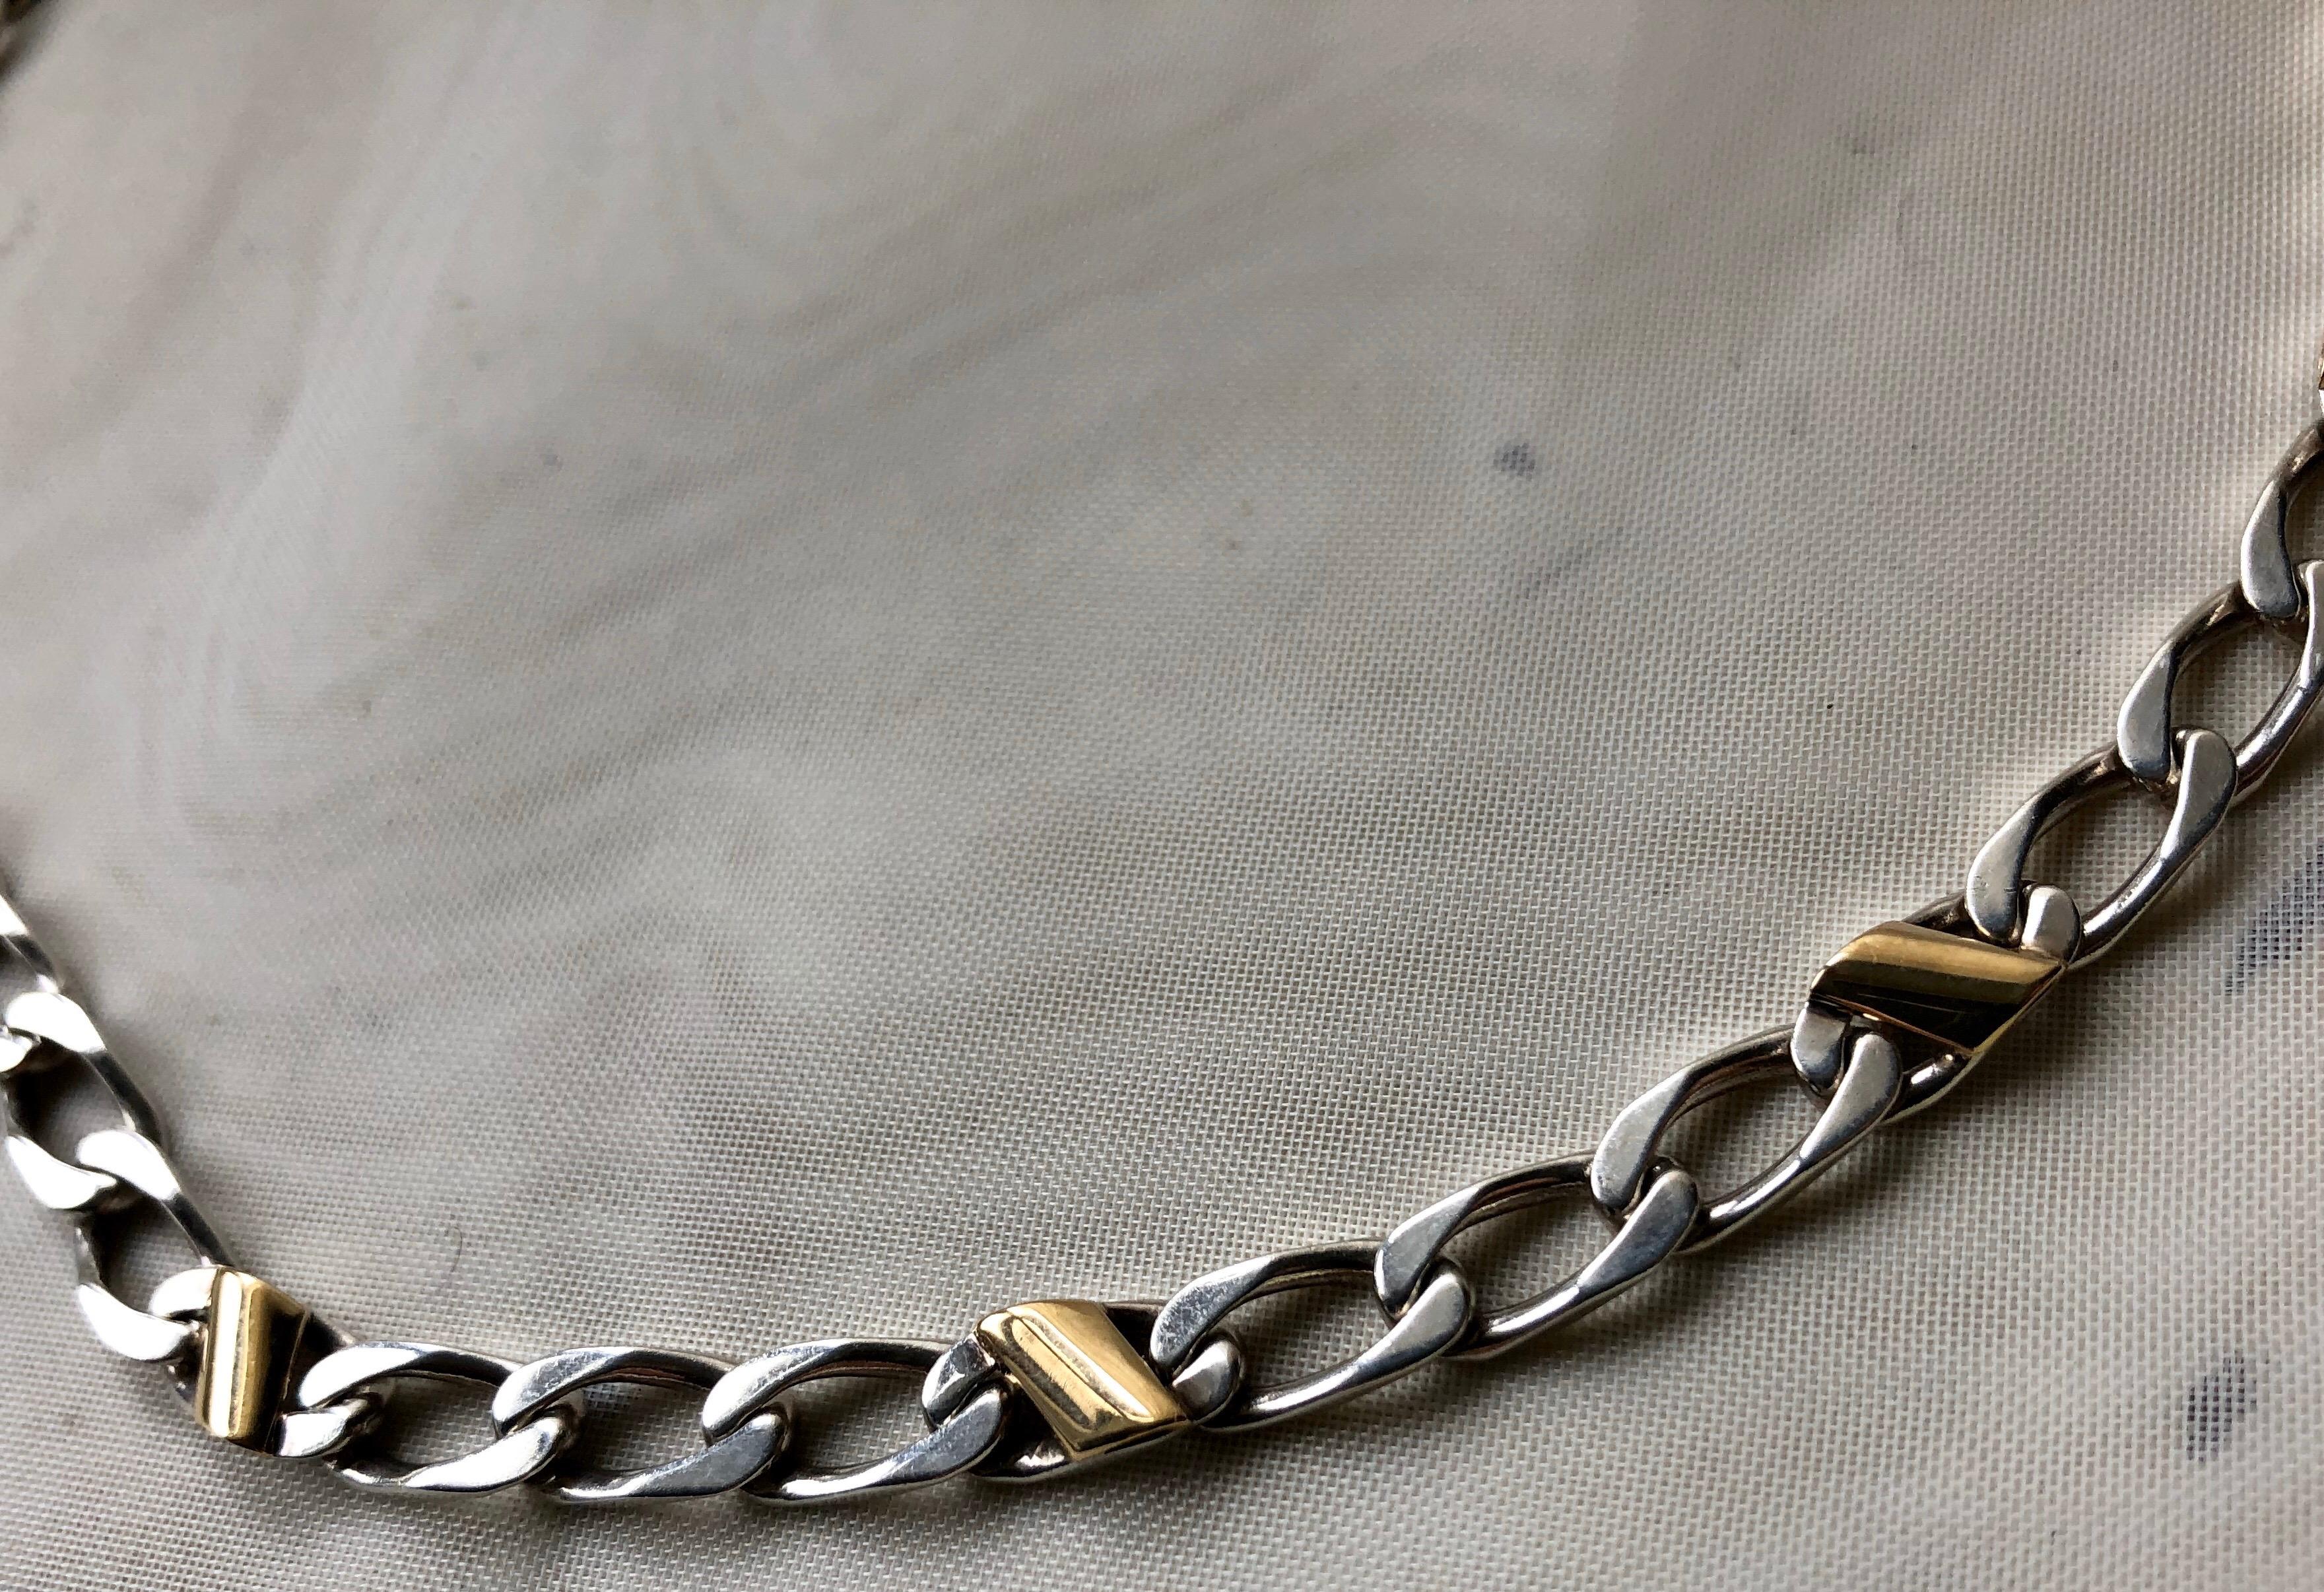 Tiffany & Co. 18K Yellow Gold Sterling Silver Curb Link Chain

This authentic Tiffany & Co. chain is approx. 16